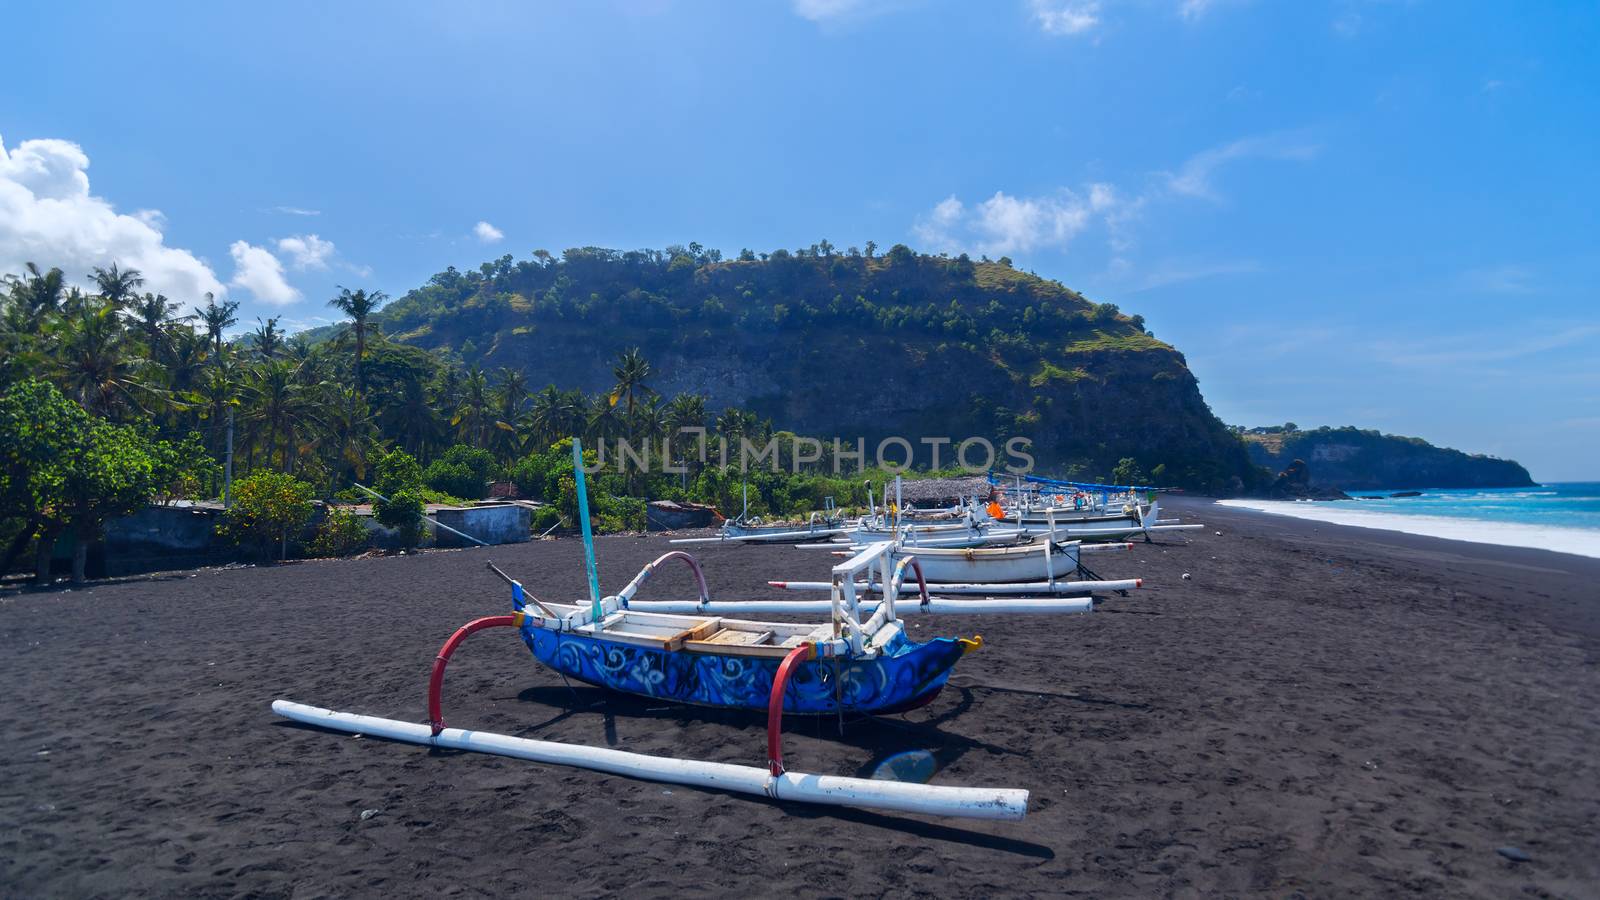 Junk on the beach of black sand on the island of Bali in Indonesia. Summer sunny day.